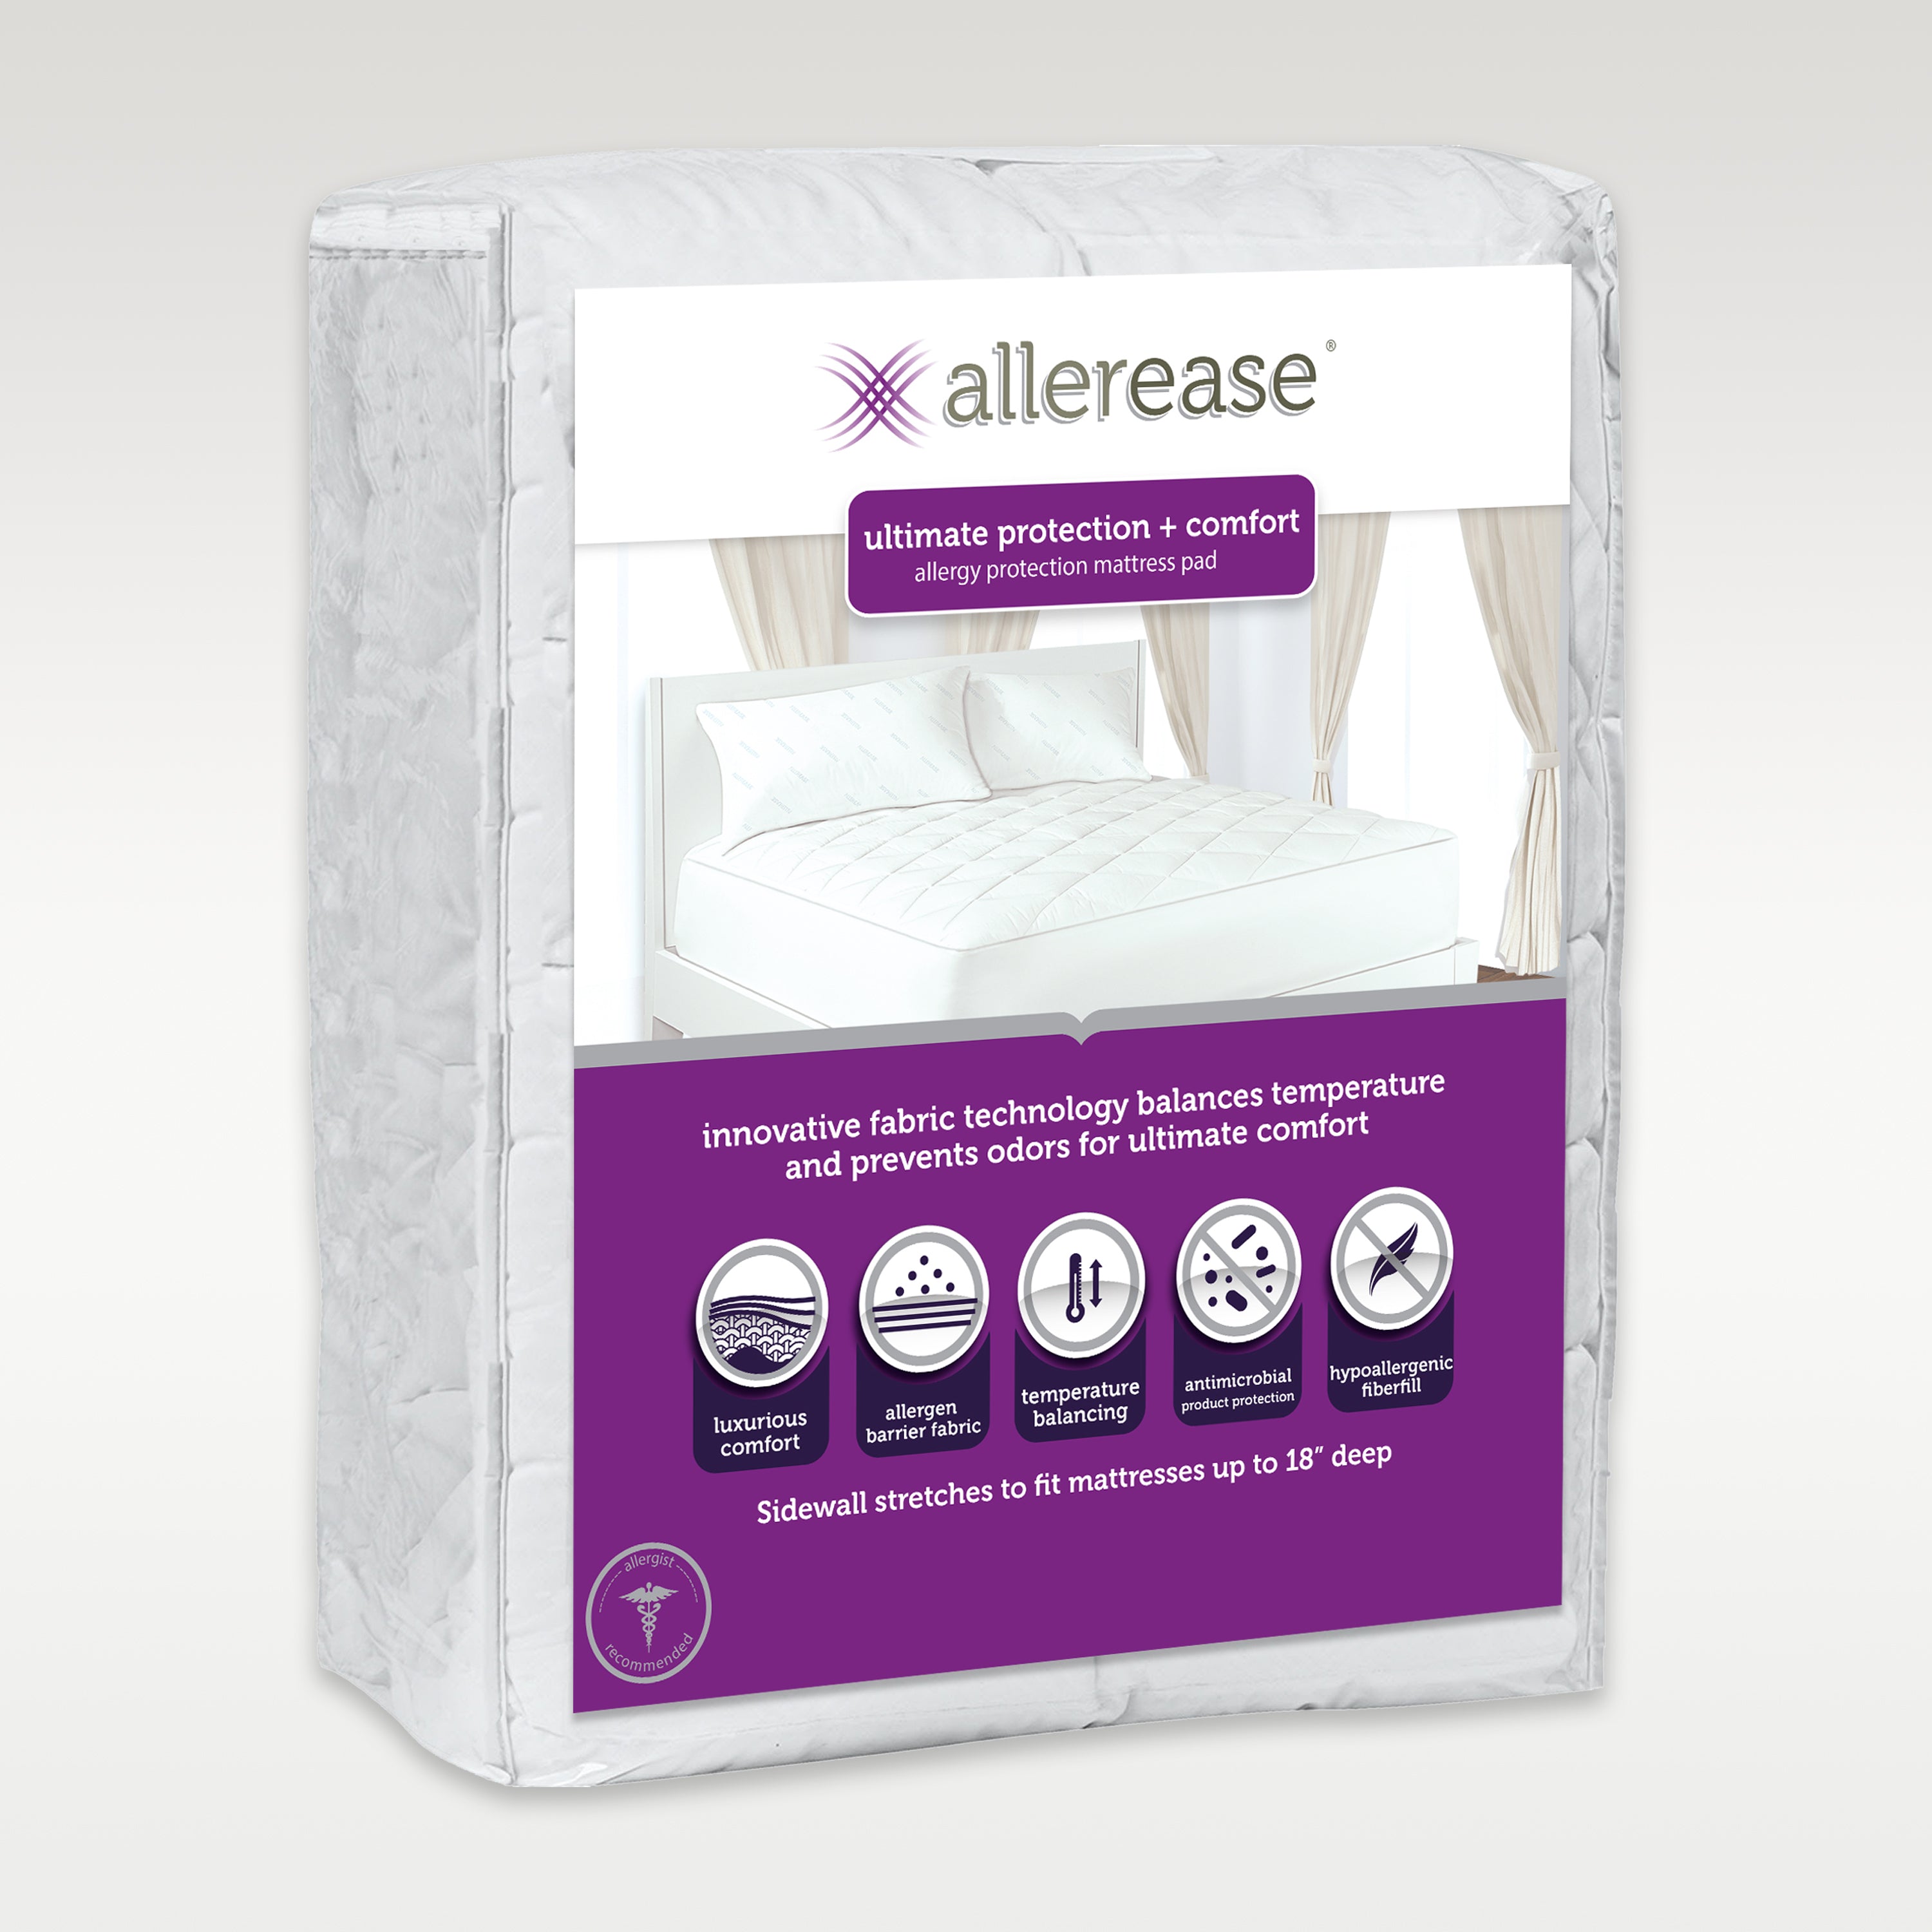 Allerease 2-in-1 Mattress Pad - White - Twin XL